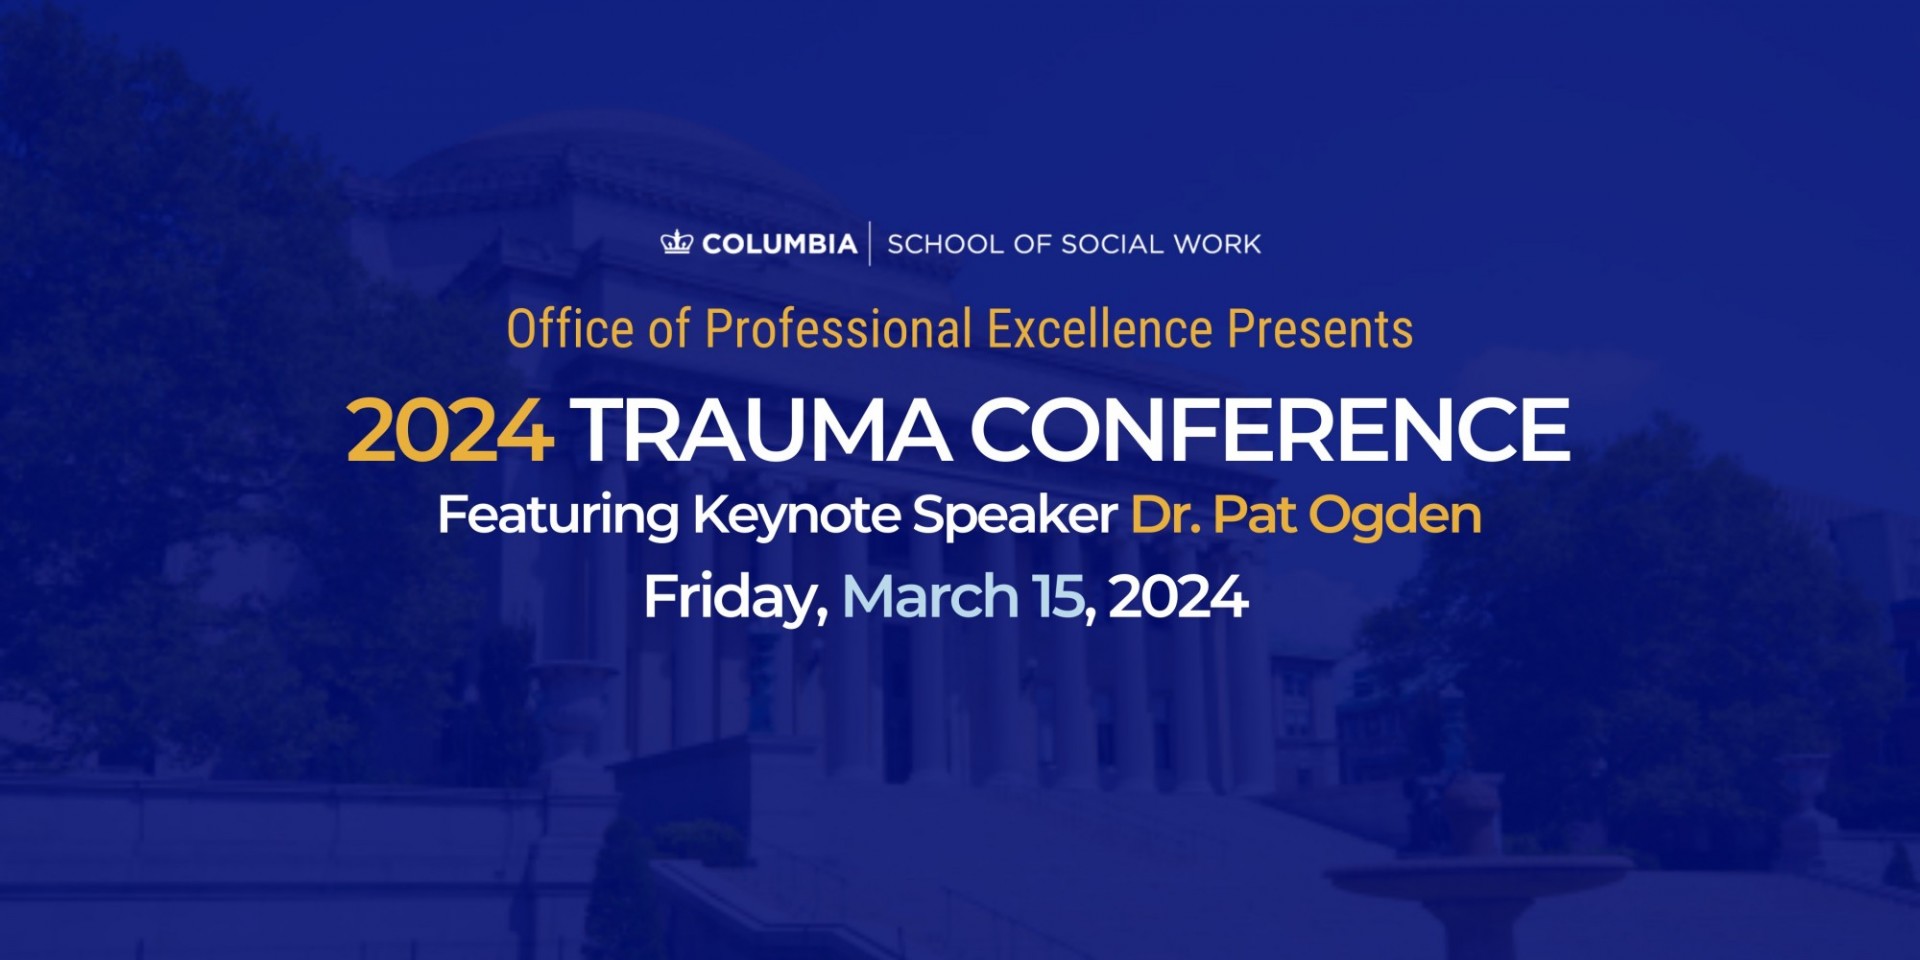 CSSW 2024 Trauma Conference Office of Professional Excellence